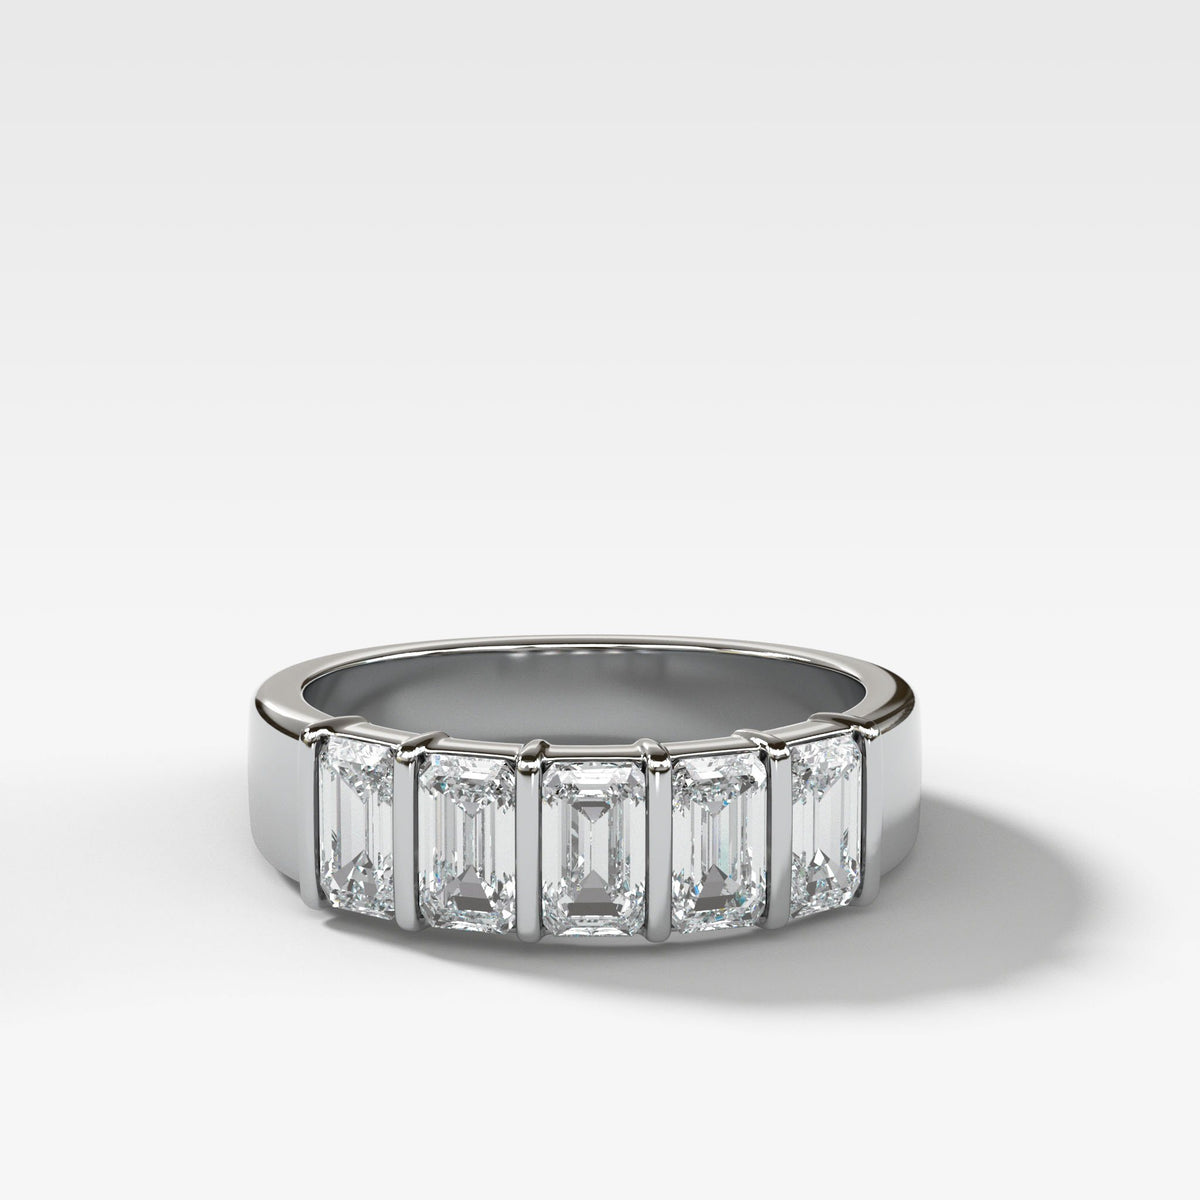 Five Stone Emerald Cut Diamond Ring by Good Stone in White Gold